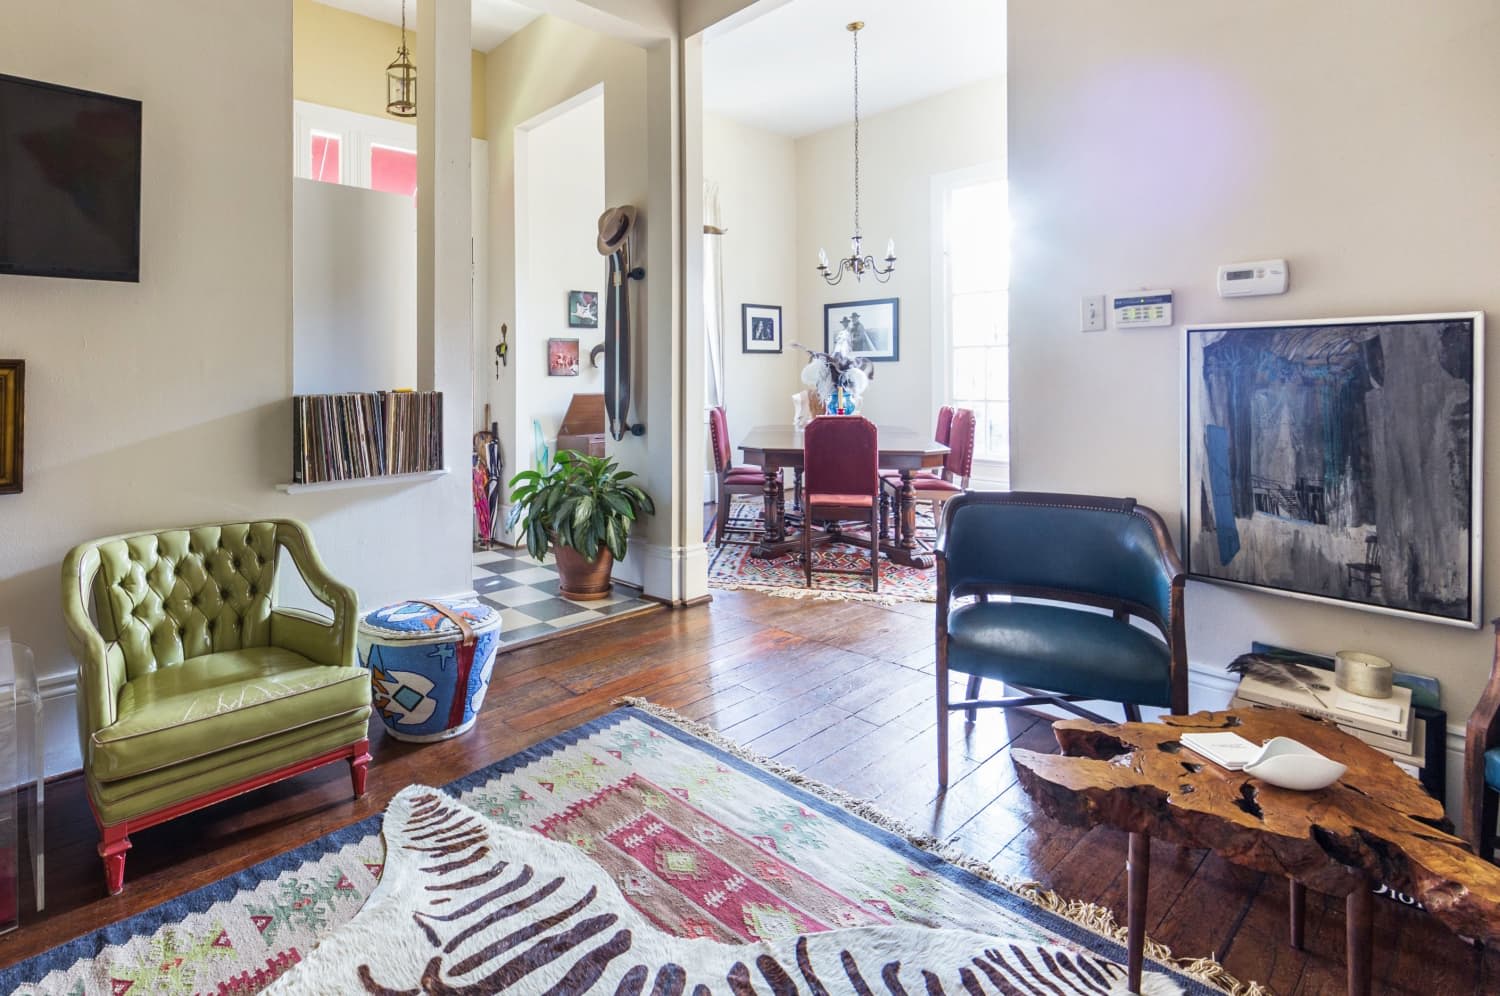 3 Places Where Financial Experts Love to Buy Rugs